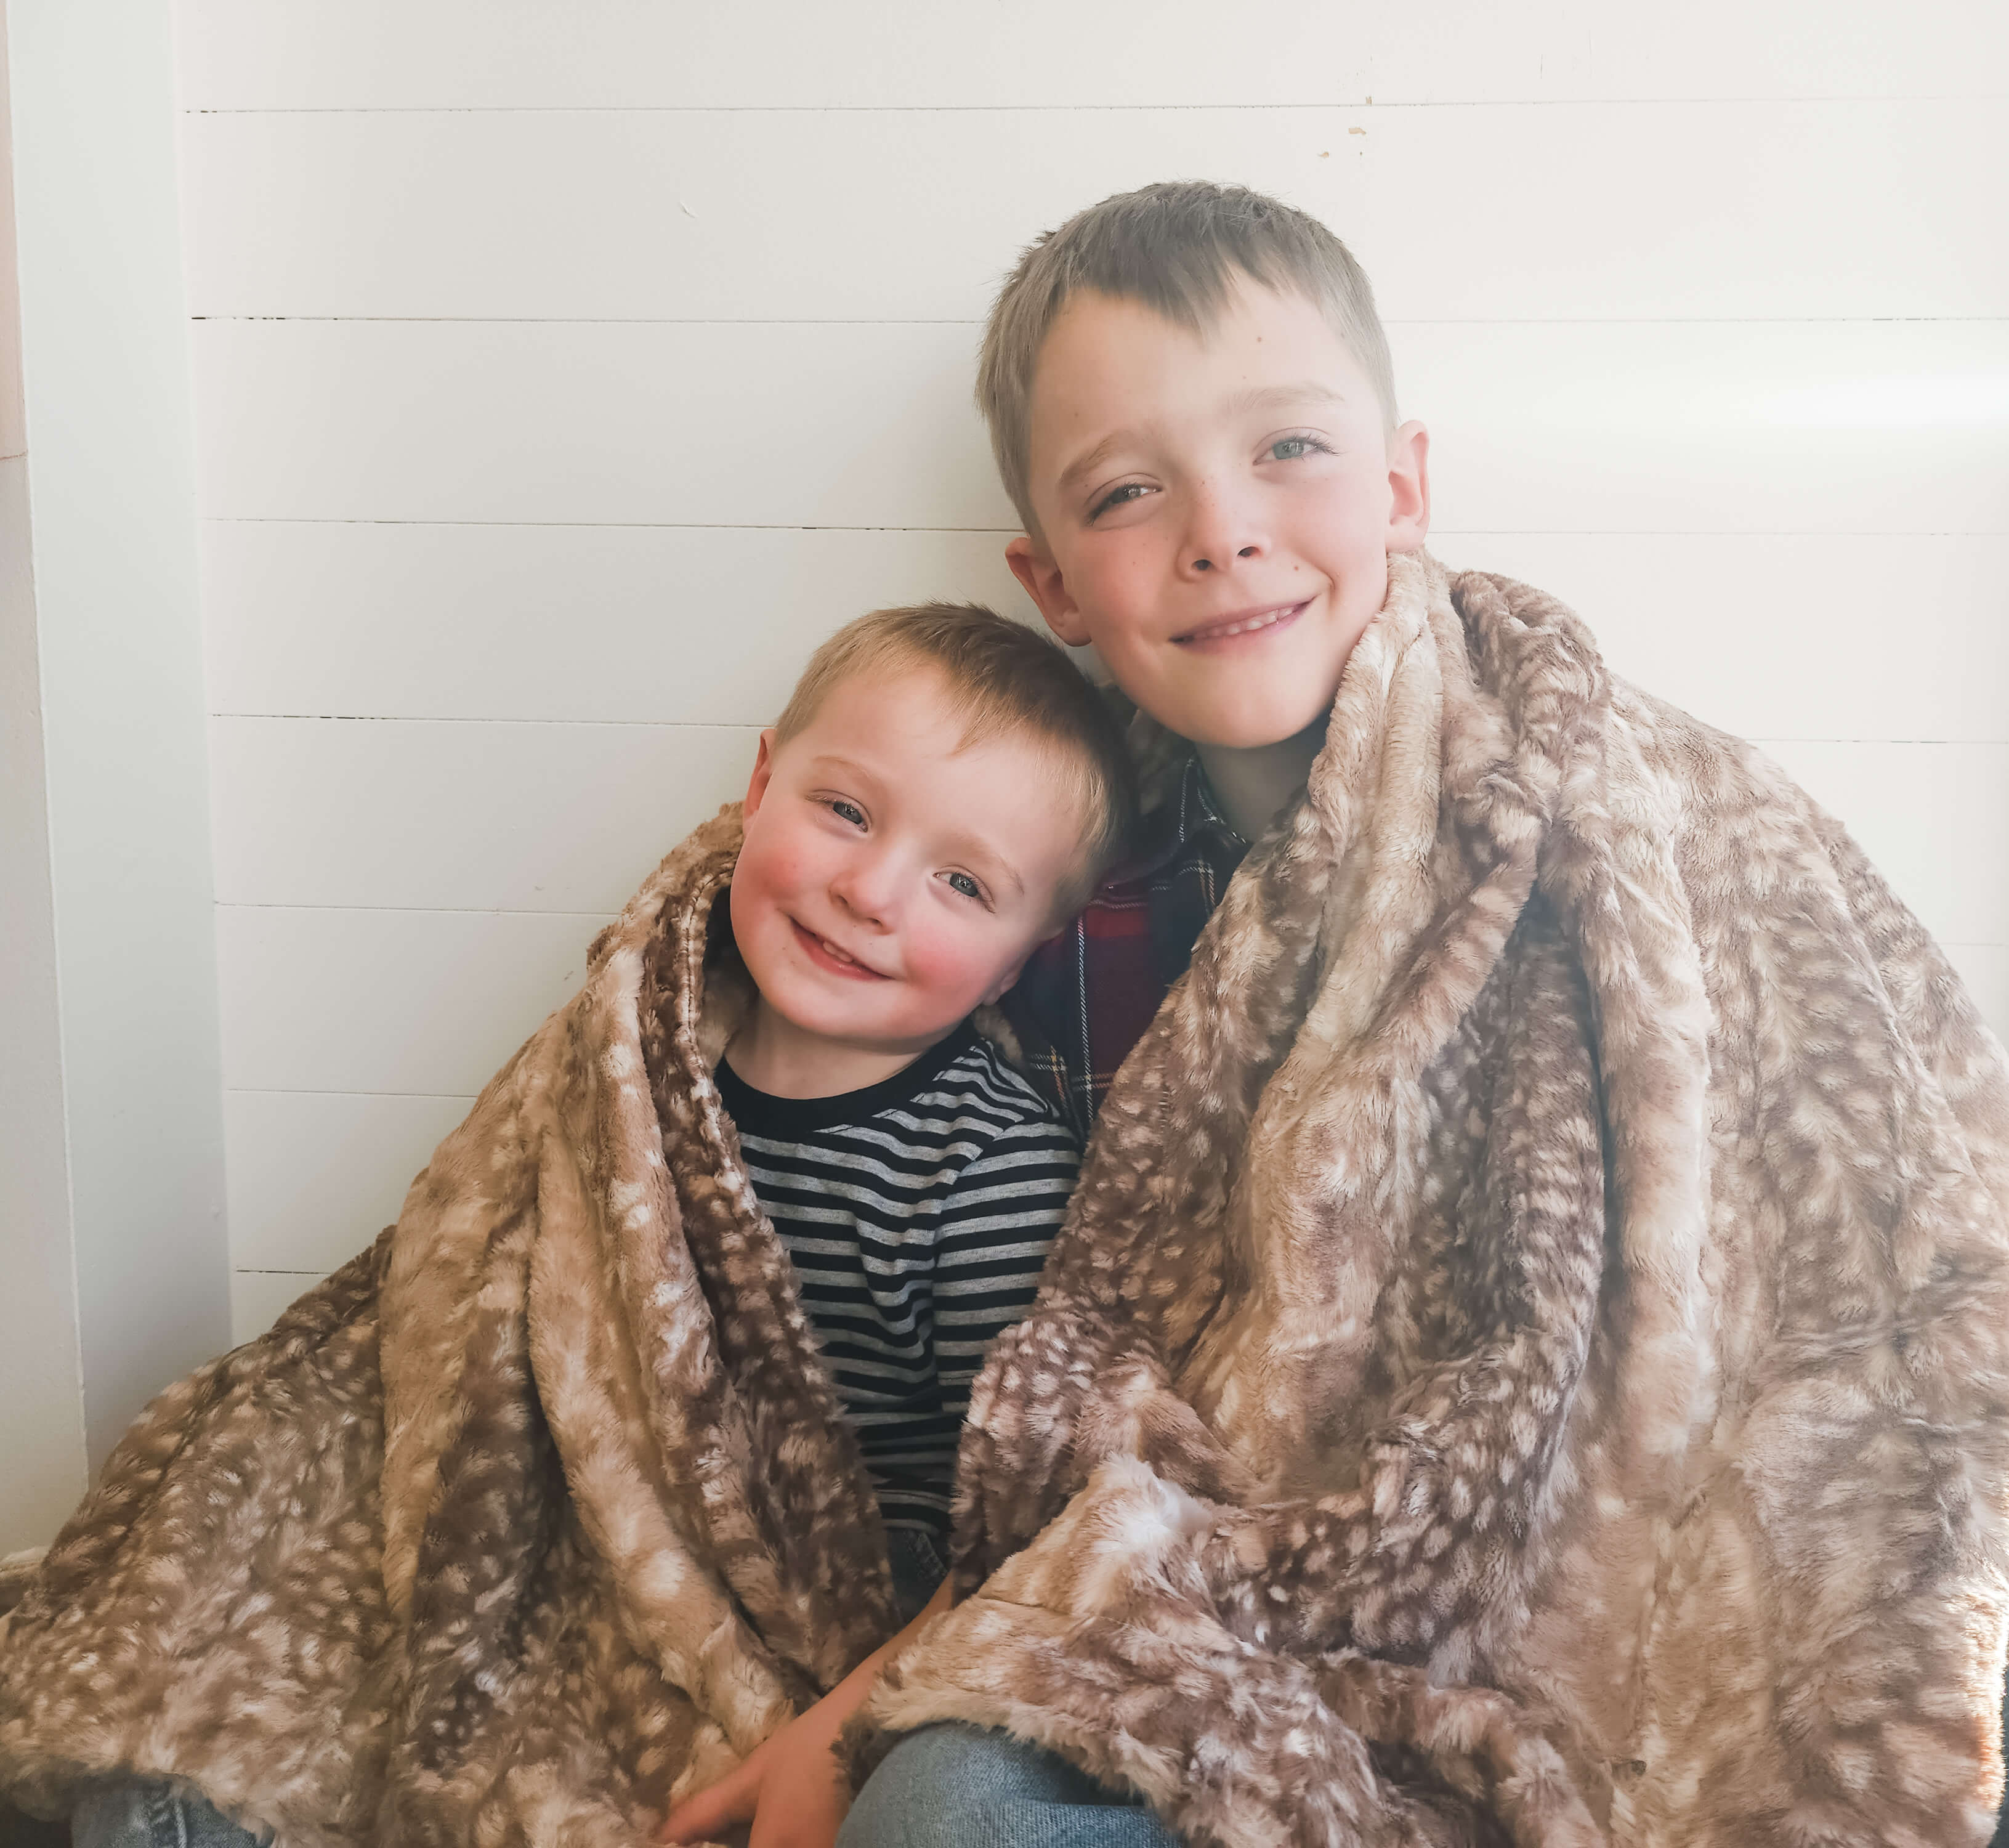 two young boys smiling sitting close together wrapped in a fawn print blanket